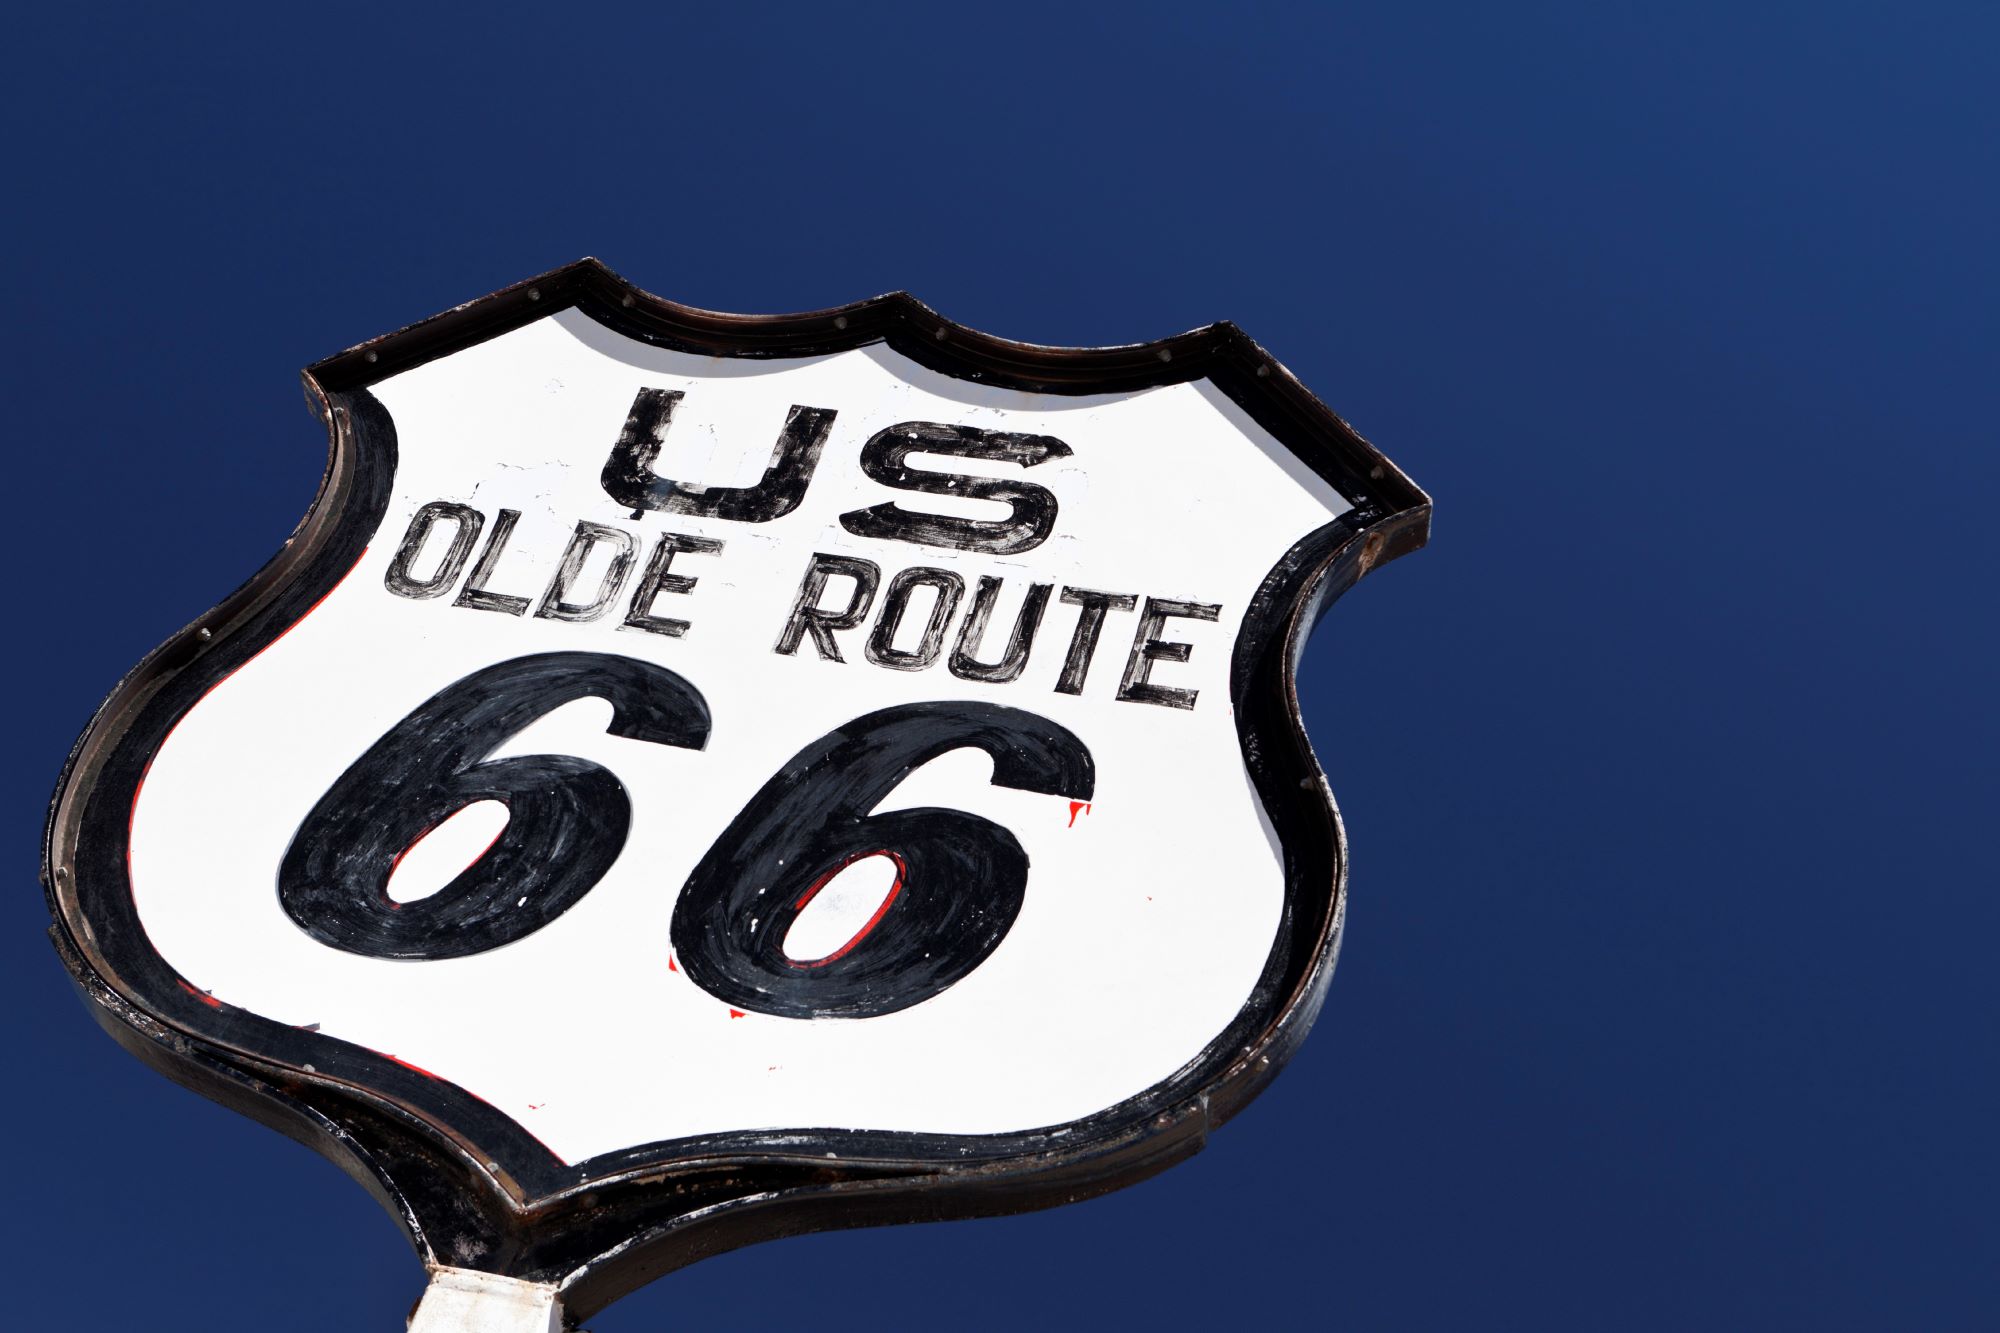 Route 66 sign in against a blue sky.